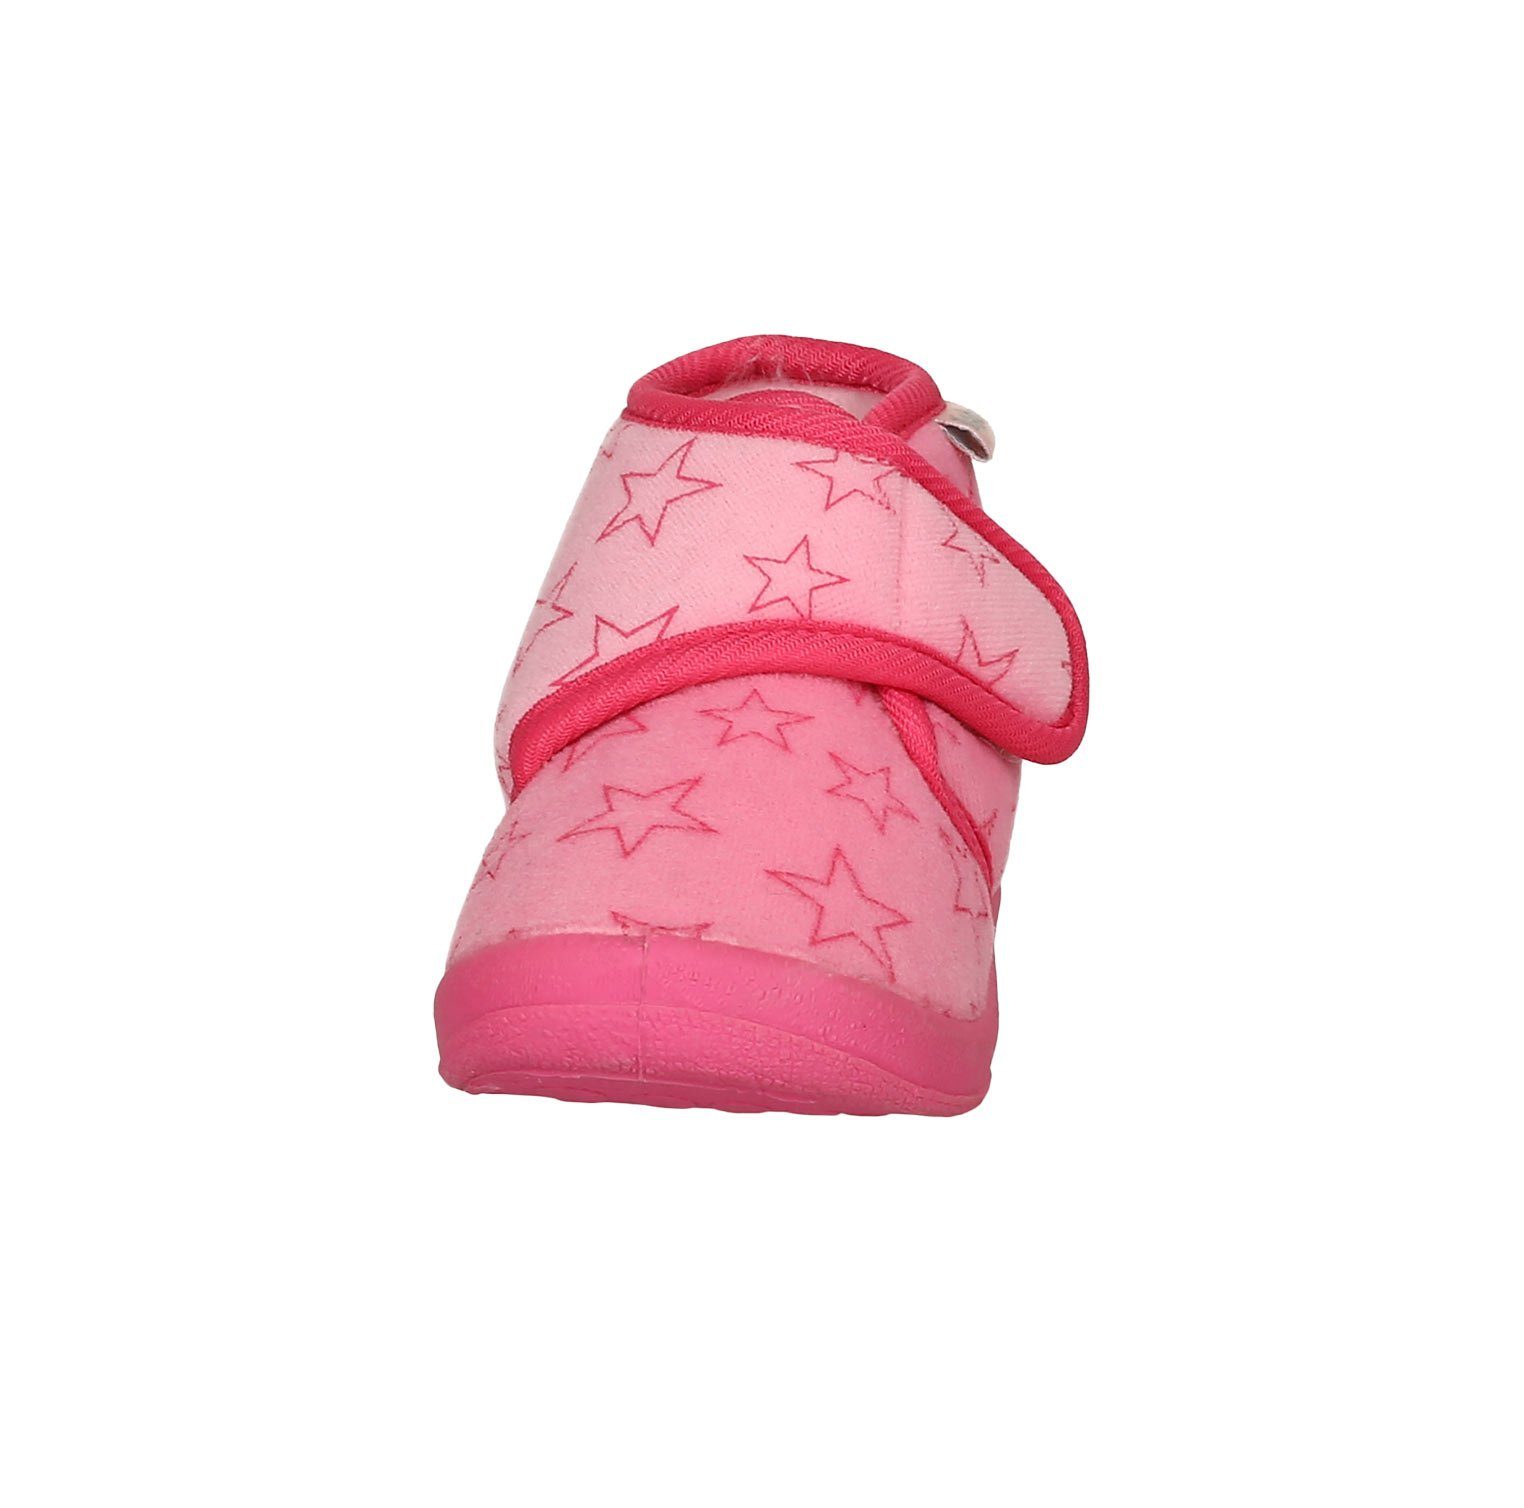 Hausschuh Rosa Playshoes Pastell Hausschuh